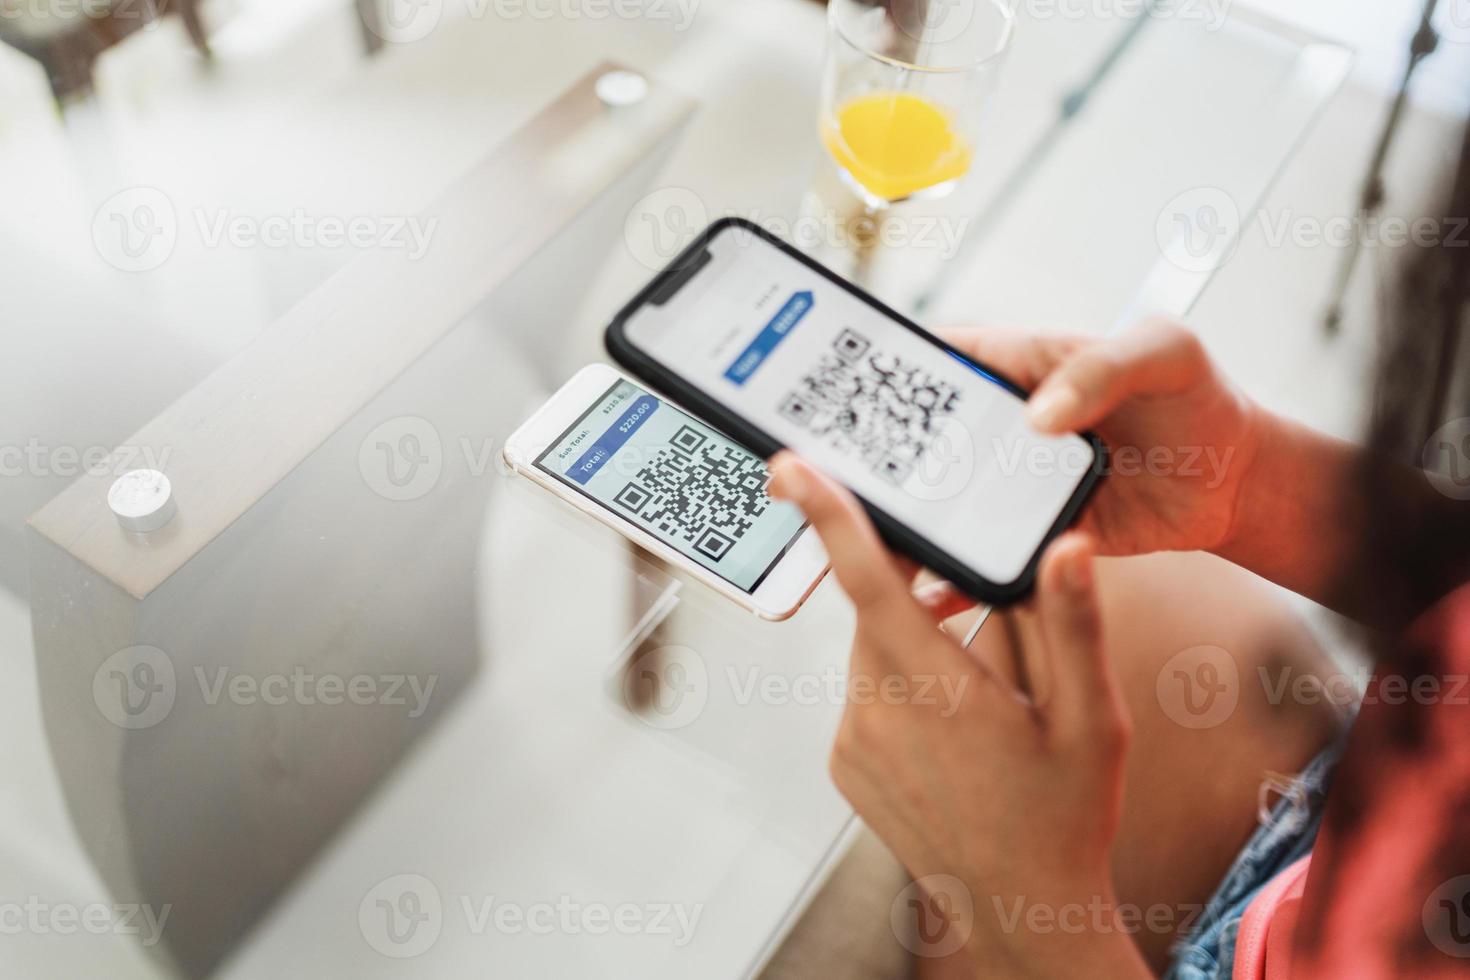 New form of payment of bills and bills in Brazil. Woman holding cell phone with pix app with QR Code, x close-up of the screen. photo